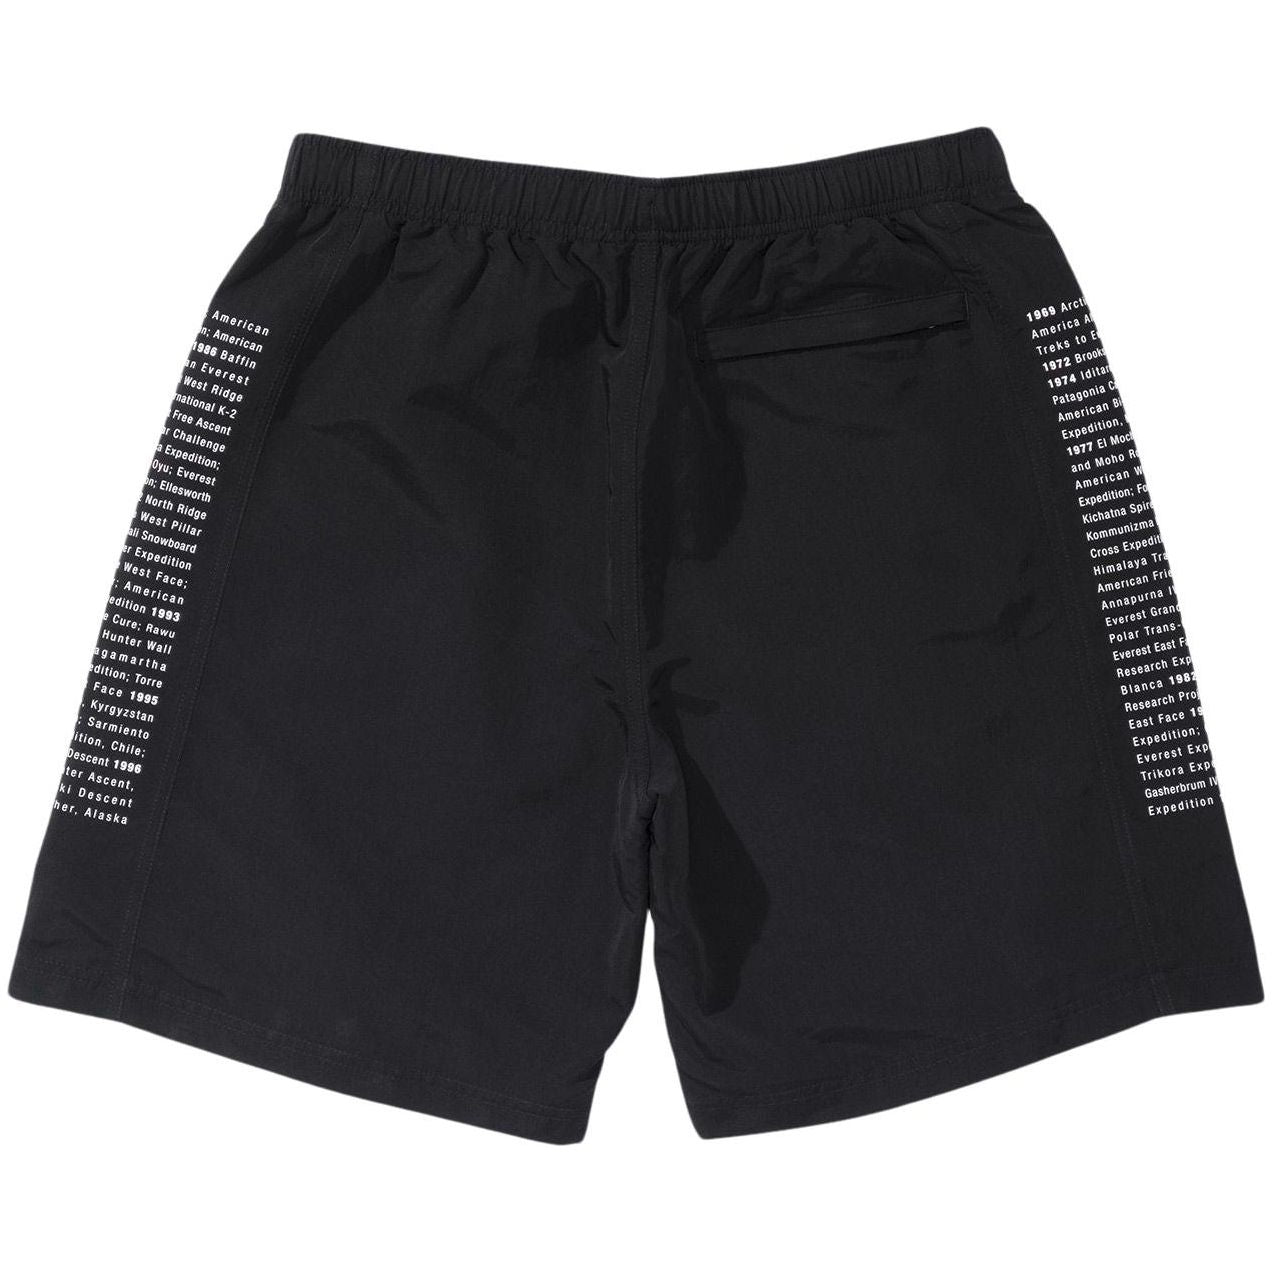 Supreme The North Face Nylon Short Black by Supreme from £165.00